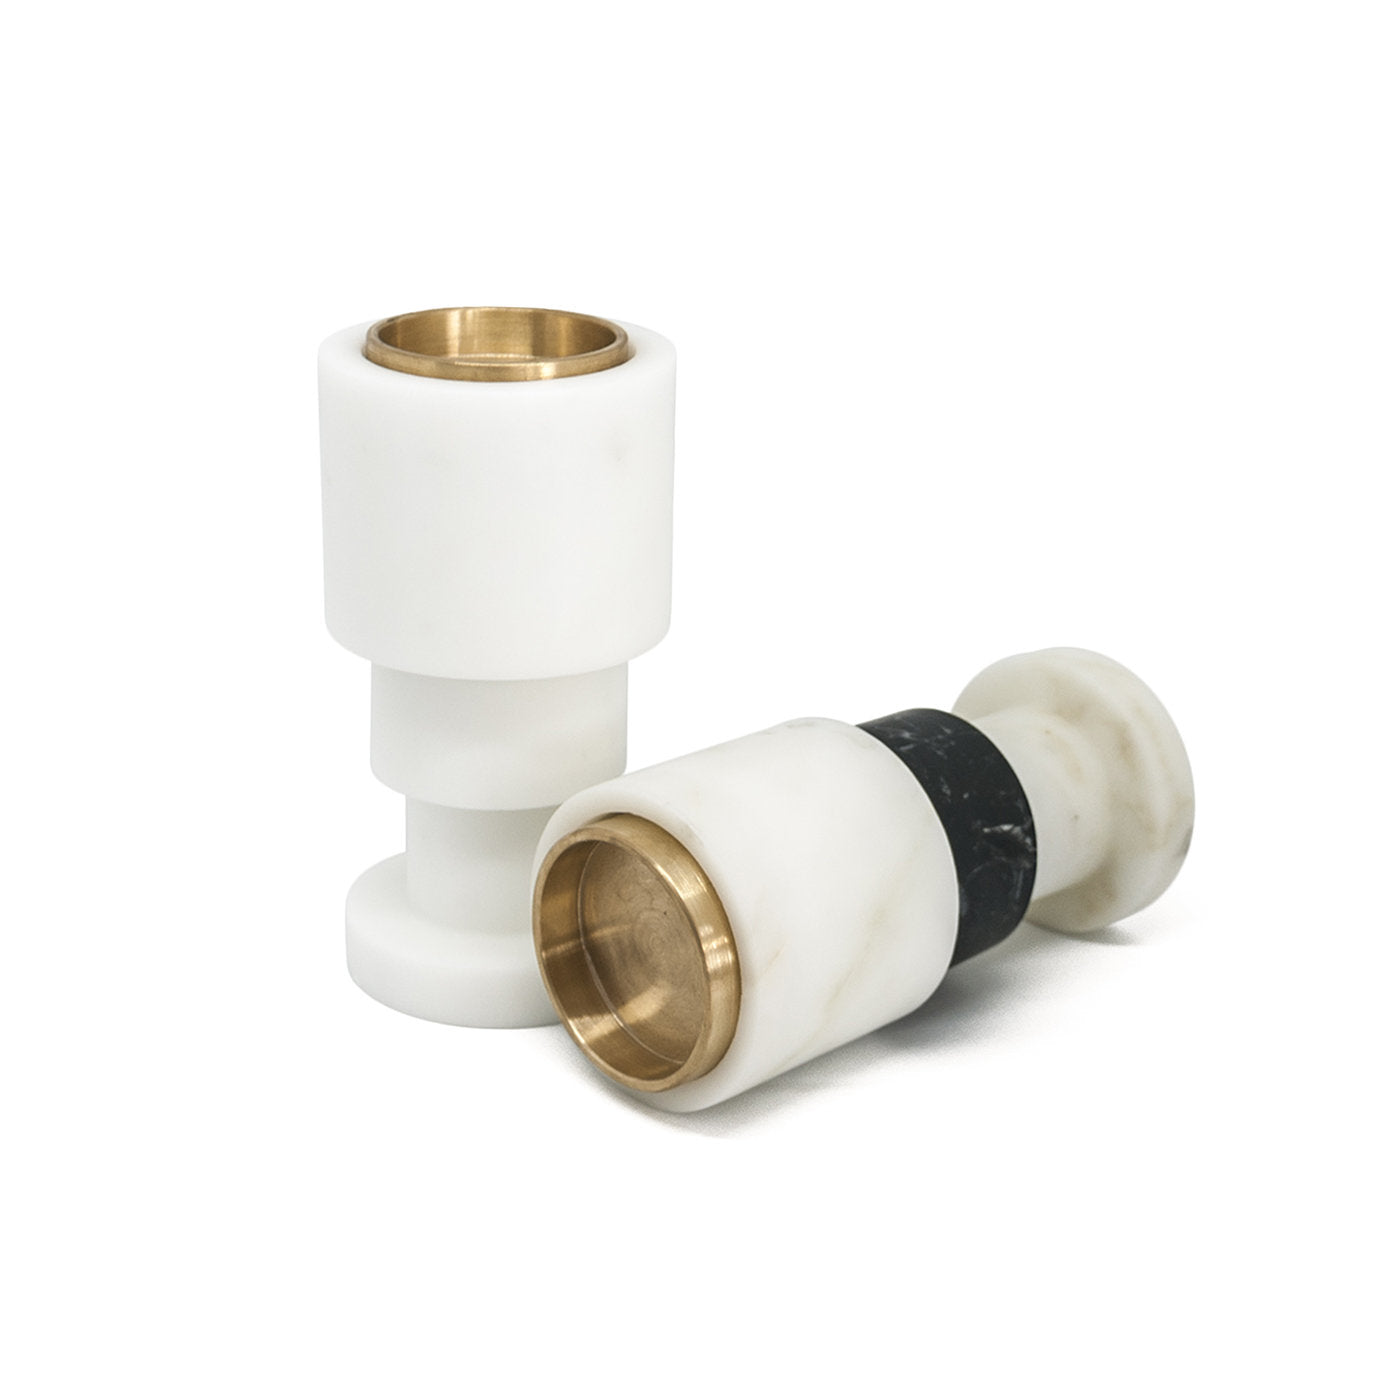 Carrara Marble and Brass Candleholder by Jacopo Simonetti - Alternative view 3